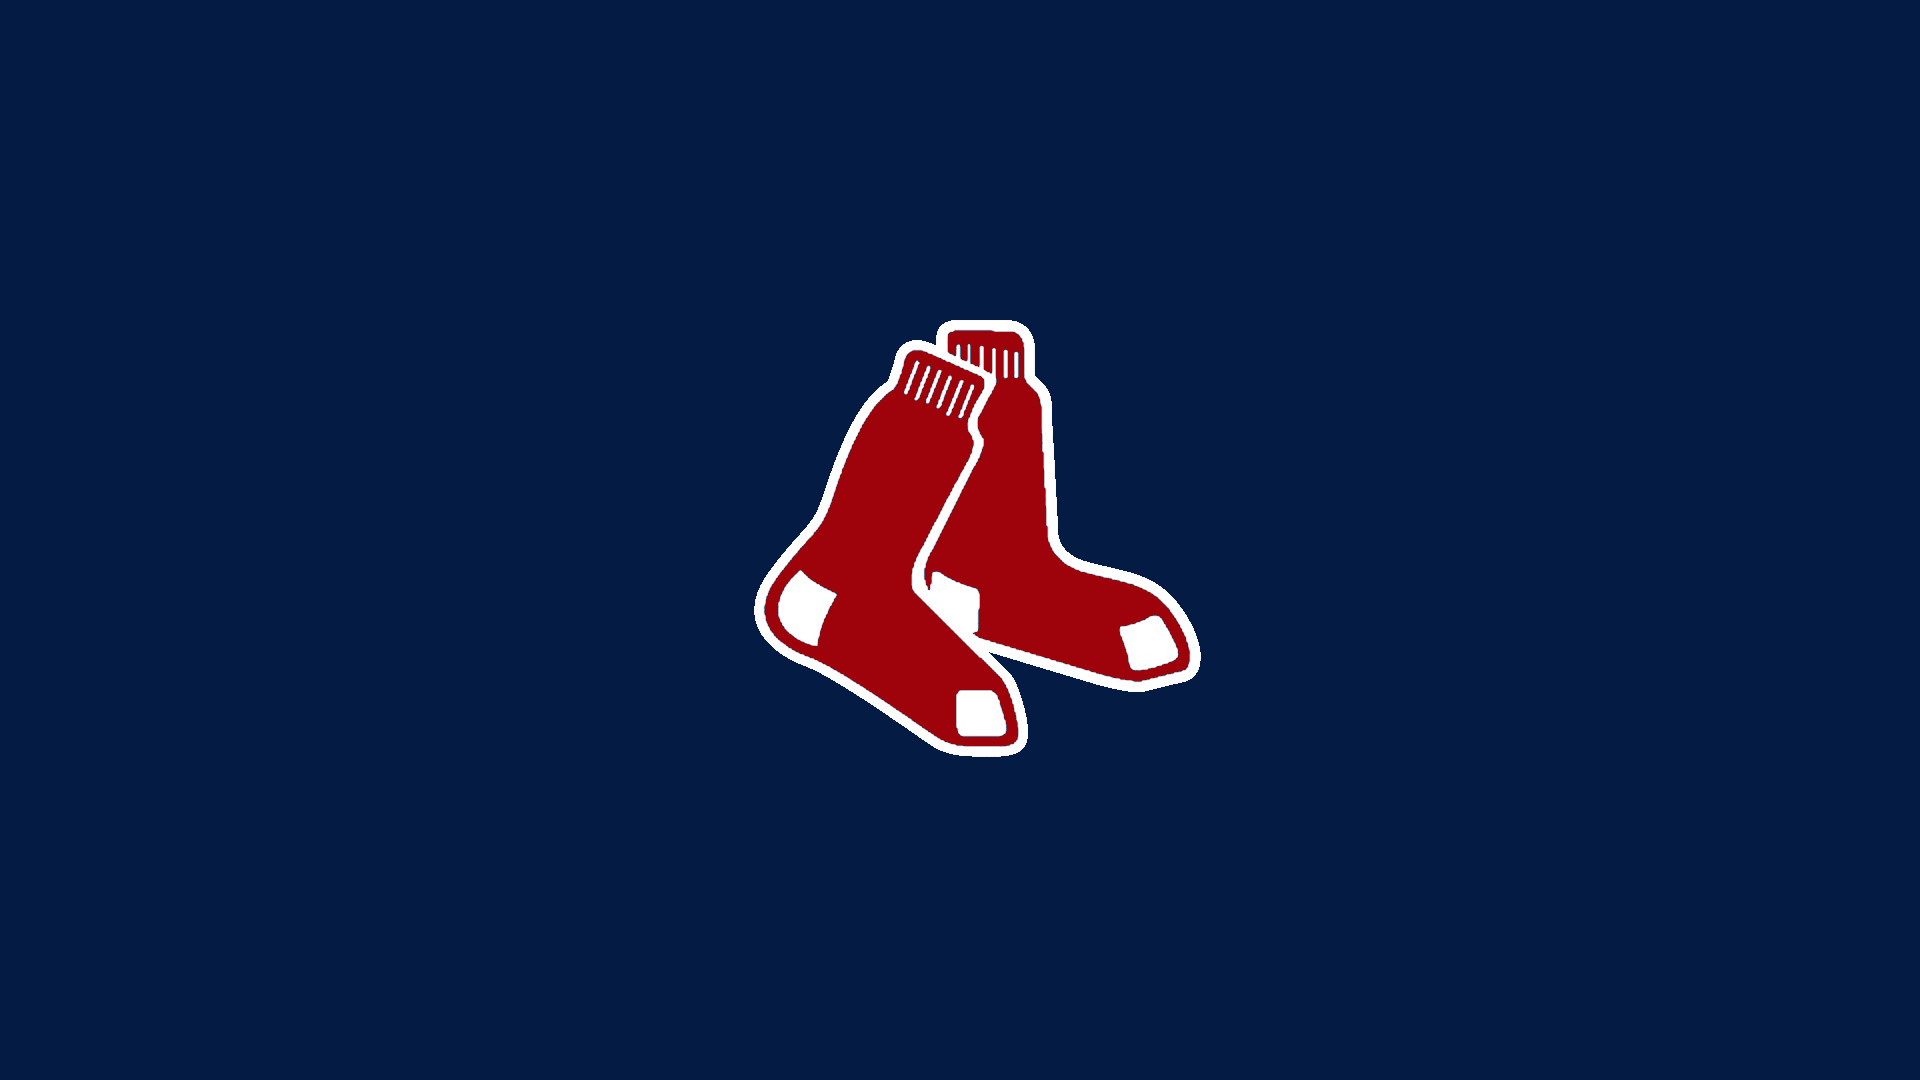 Red Sox desktop wallpaper with Boston Red Sox logo and sports theme.